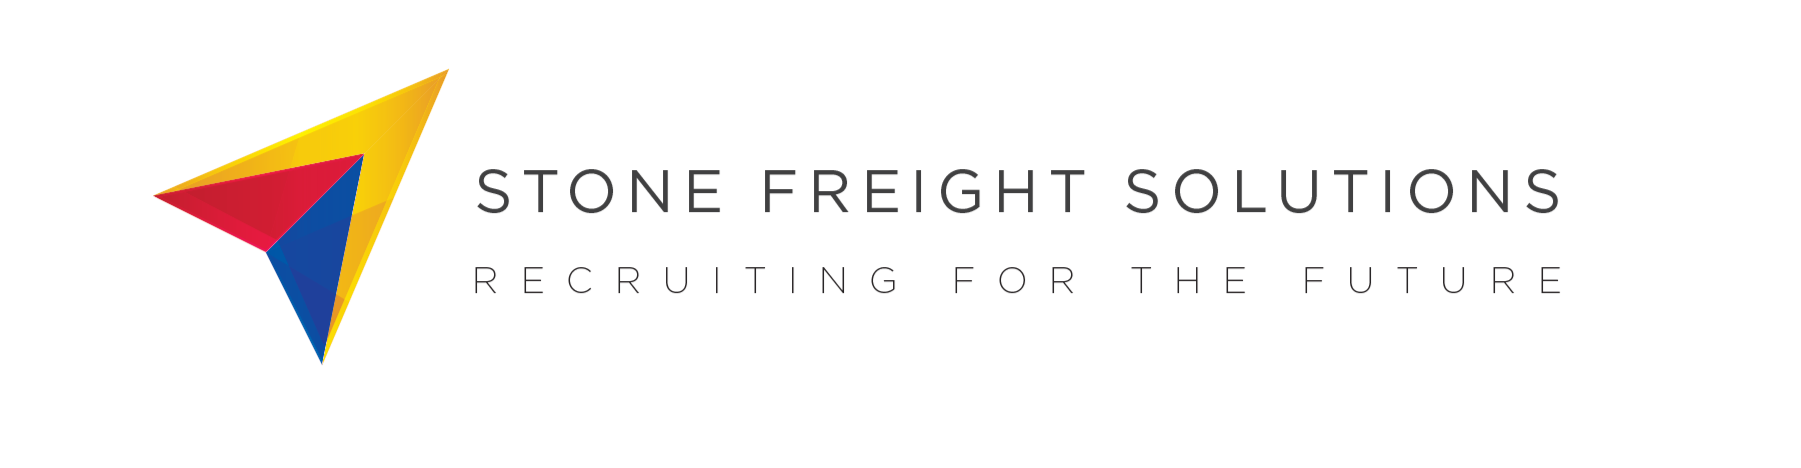 Stone Freight Solutions banner